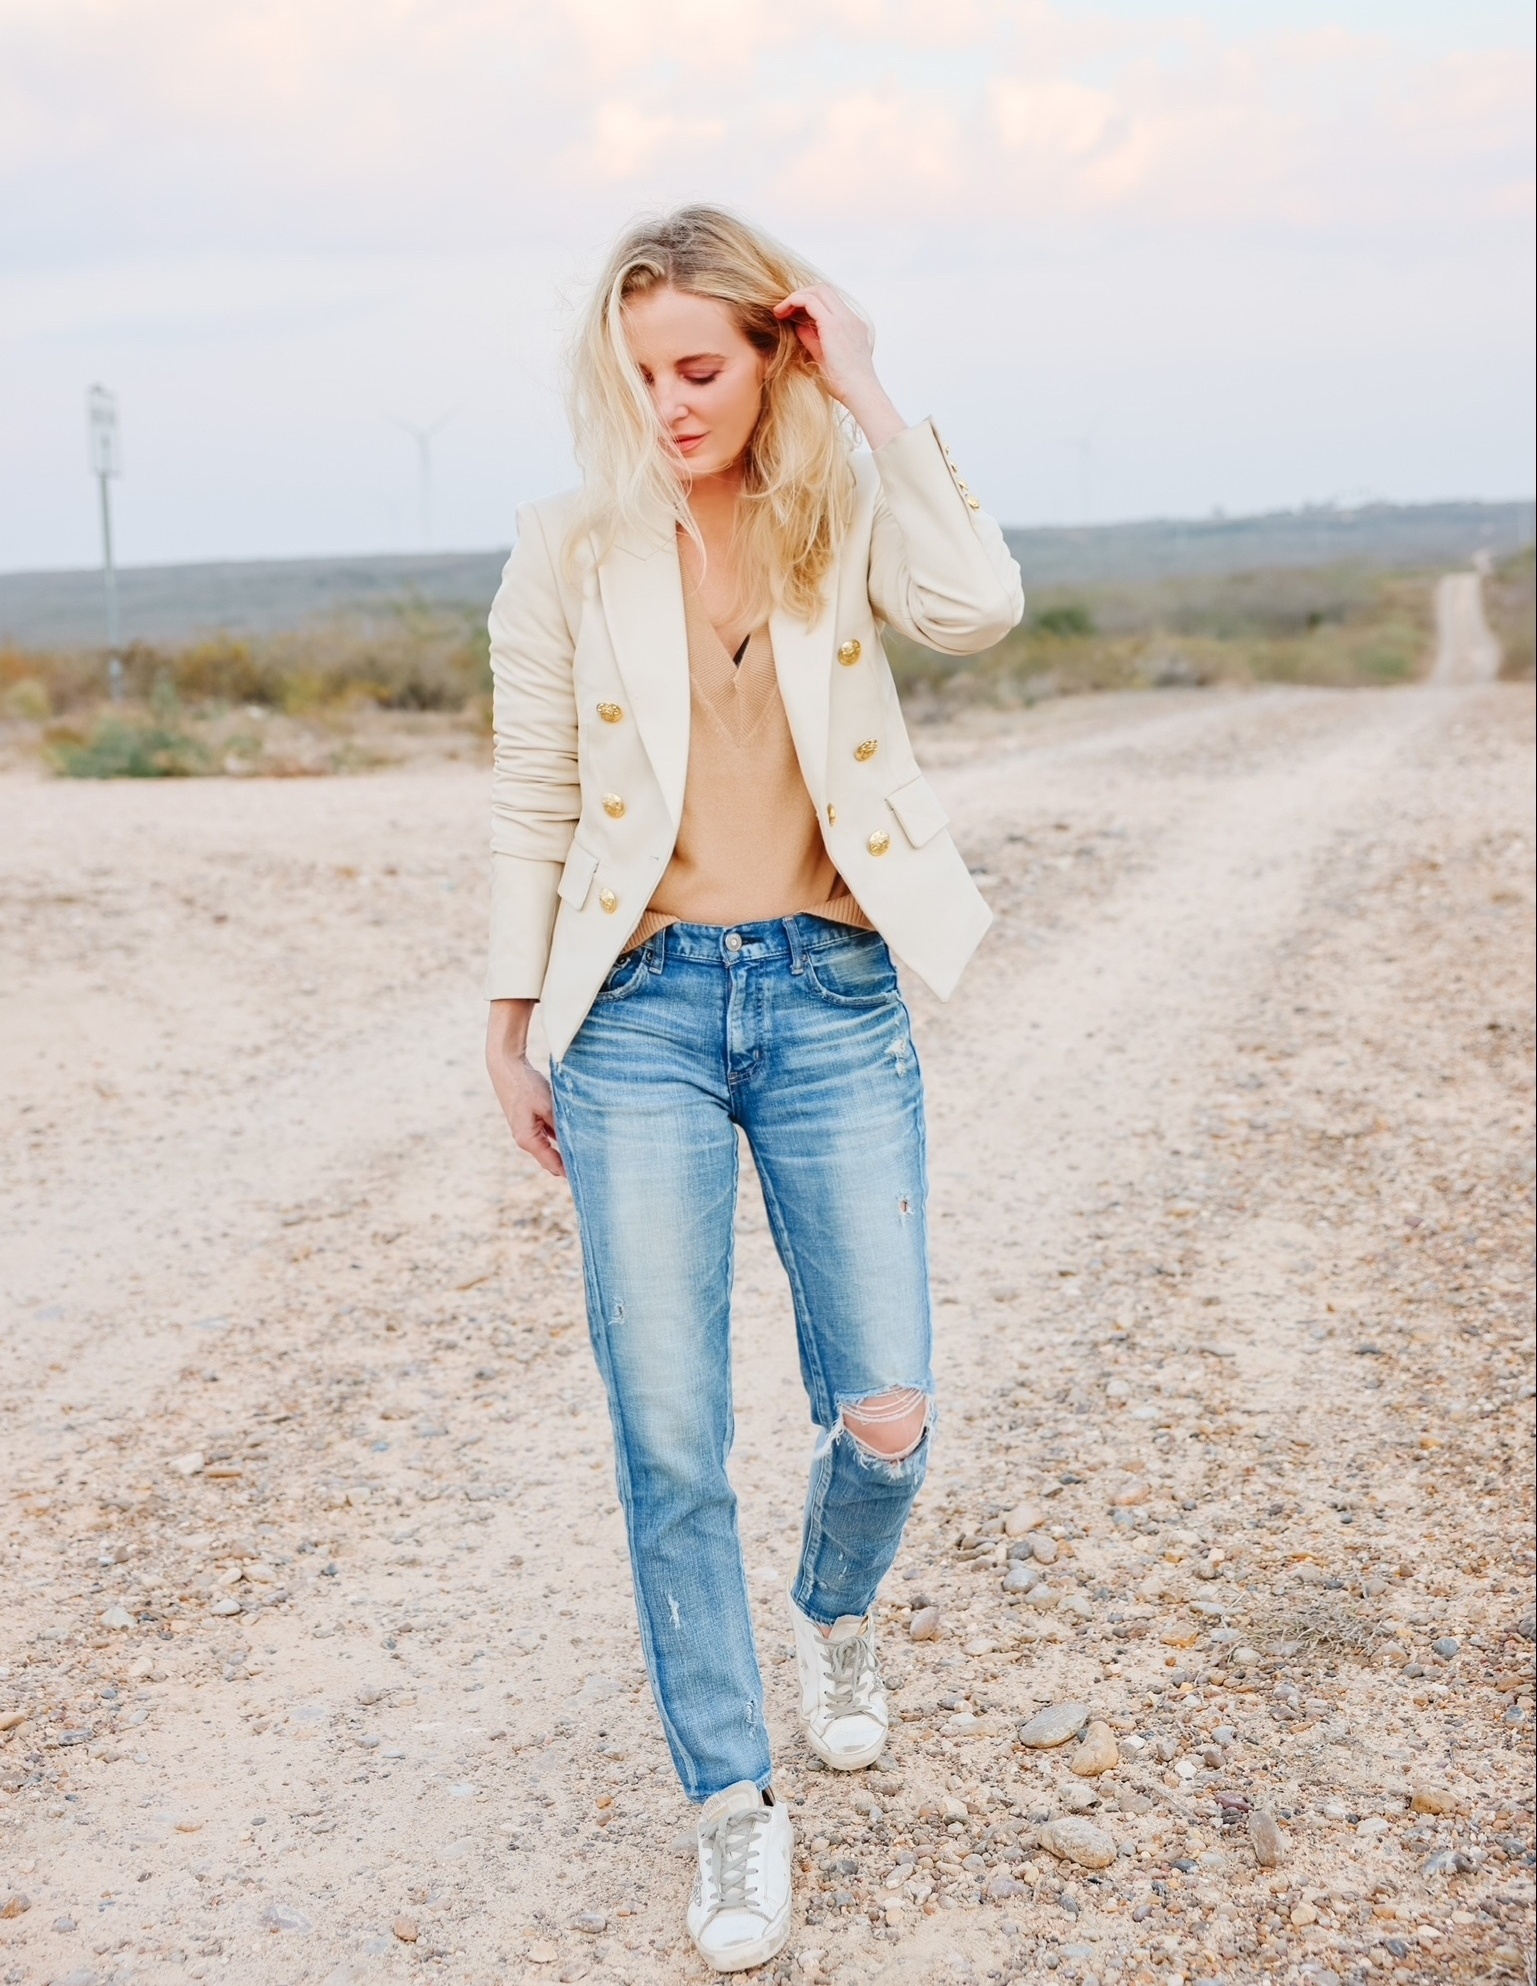 Blazers on women over 40 featuring style over 40 influencer Erin Busbee wearing Veronica Beard cooke blazer in white with camel sweater and moussy jeans